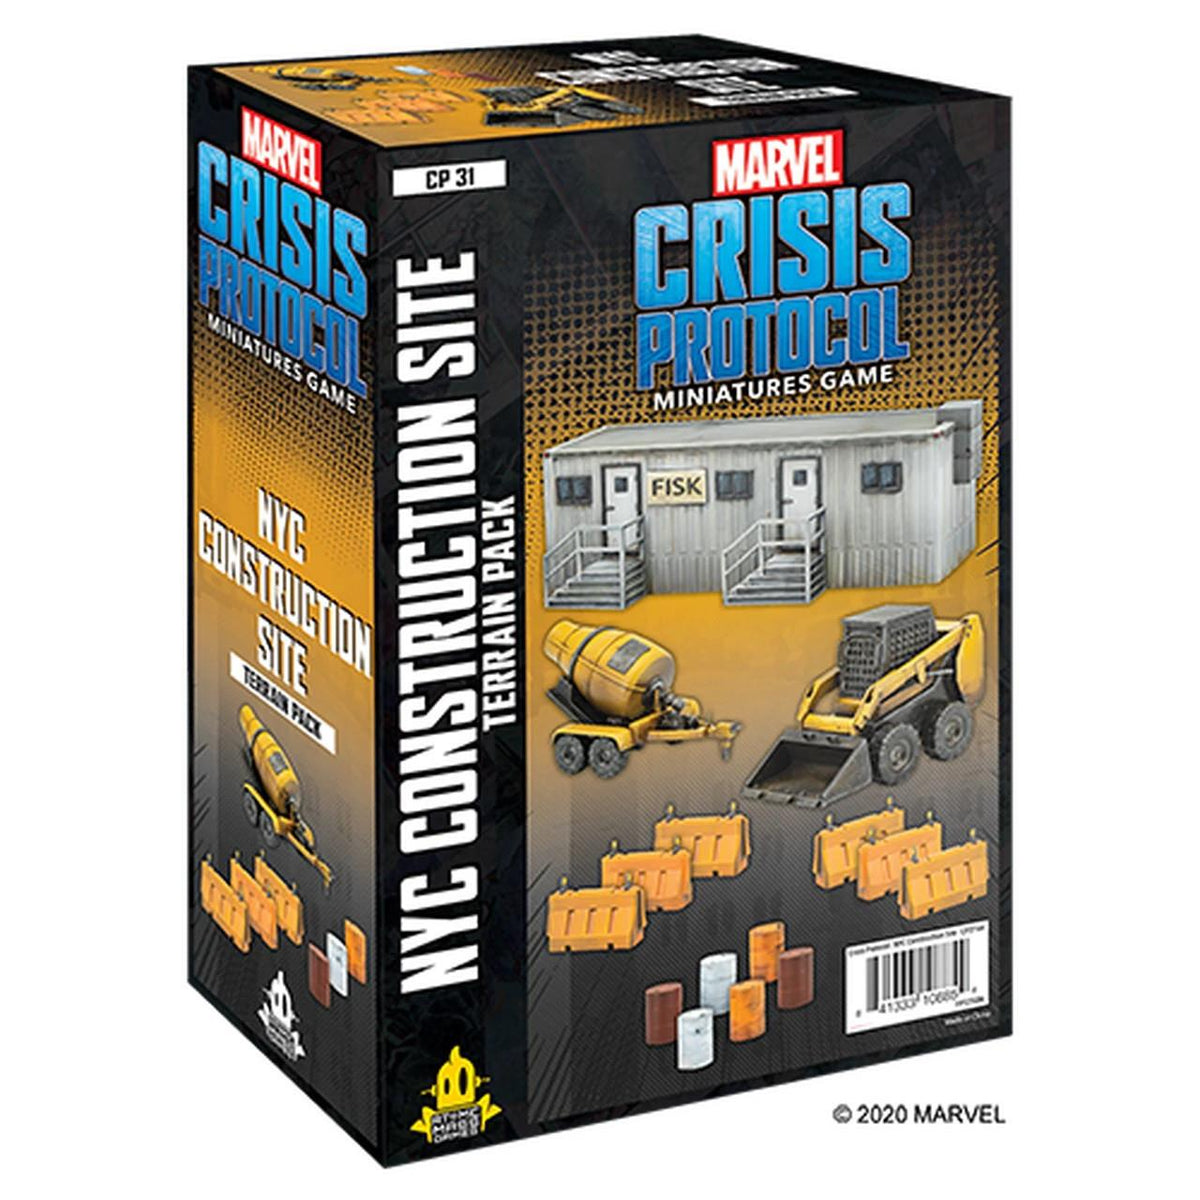 Marvel: Crisis Protocol Miniatures Game - NYC Construction Site Terrain Pack Expansion